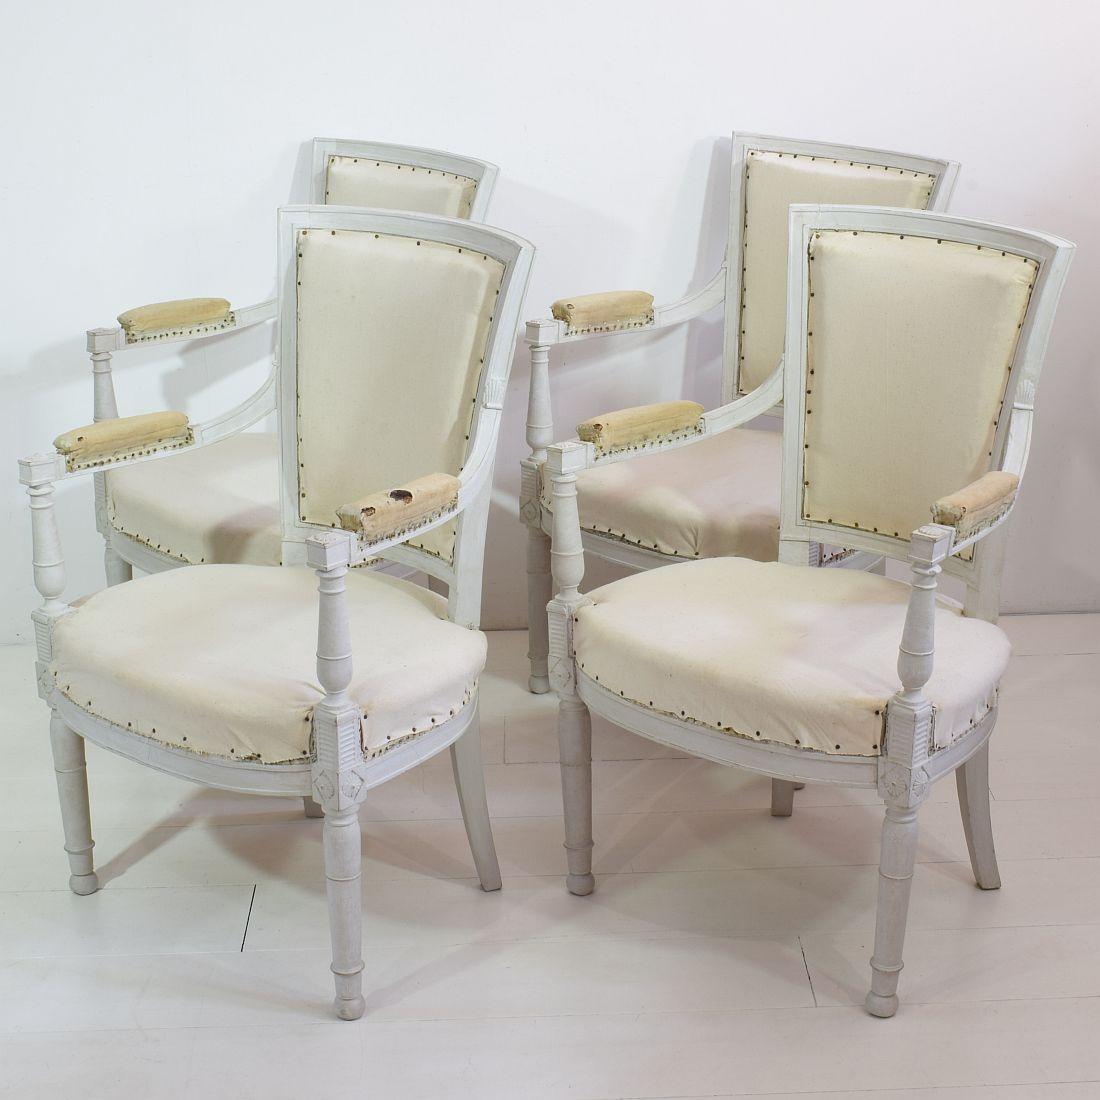 Beautiful and rare set of 4 French original Directoire chairs, France, 18th century.
 At this moment in their underwear. Seat height is 42 cm.
 Despite of their high age, the chairs are in a relative good condition. 
Several layers of paint